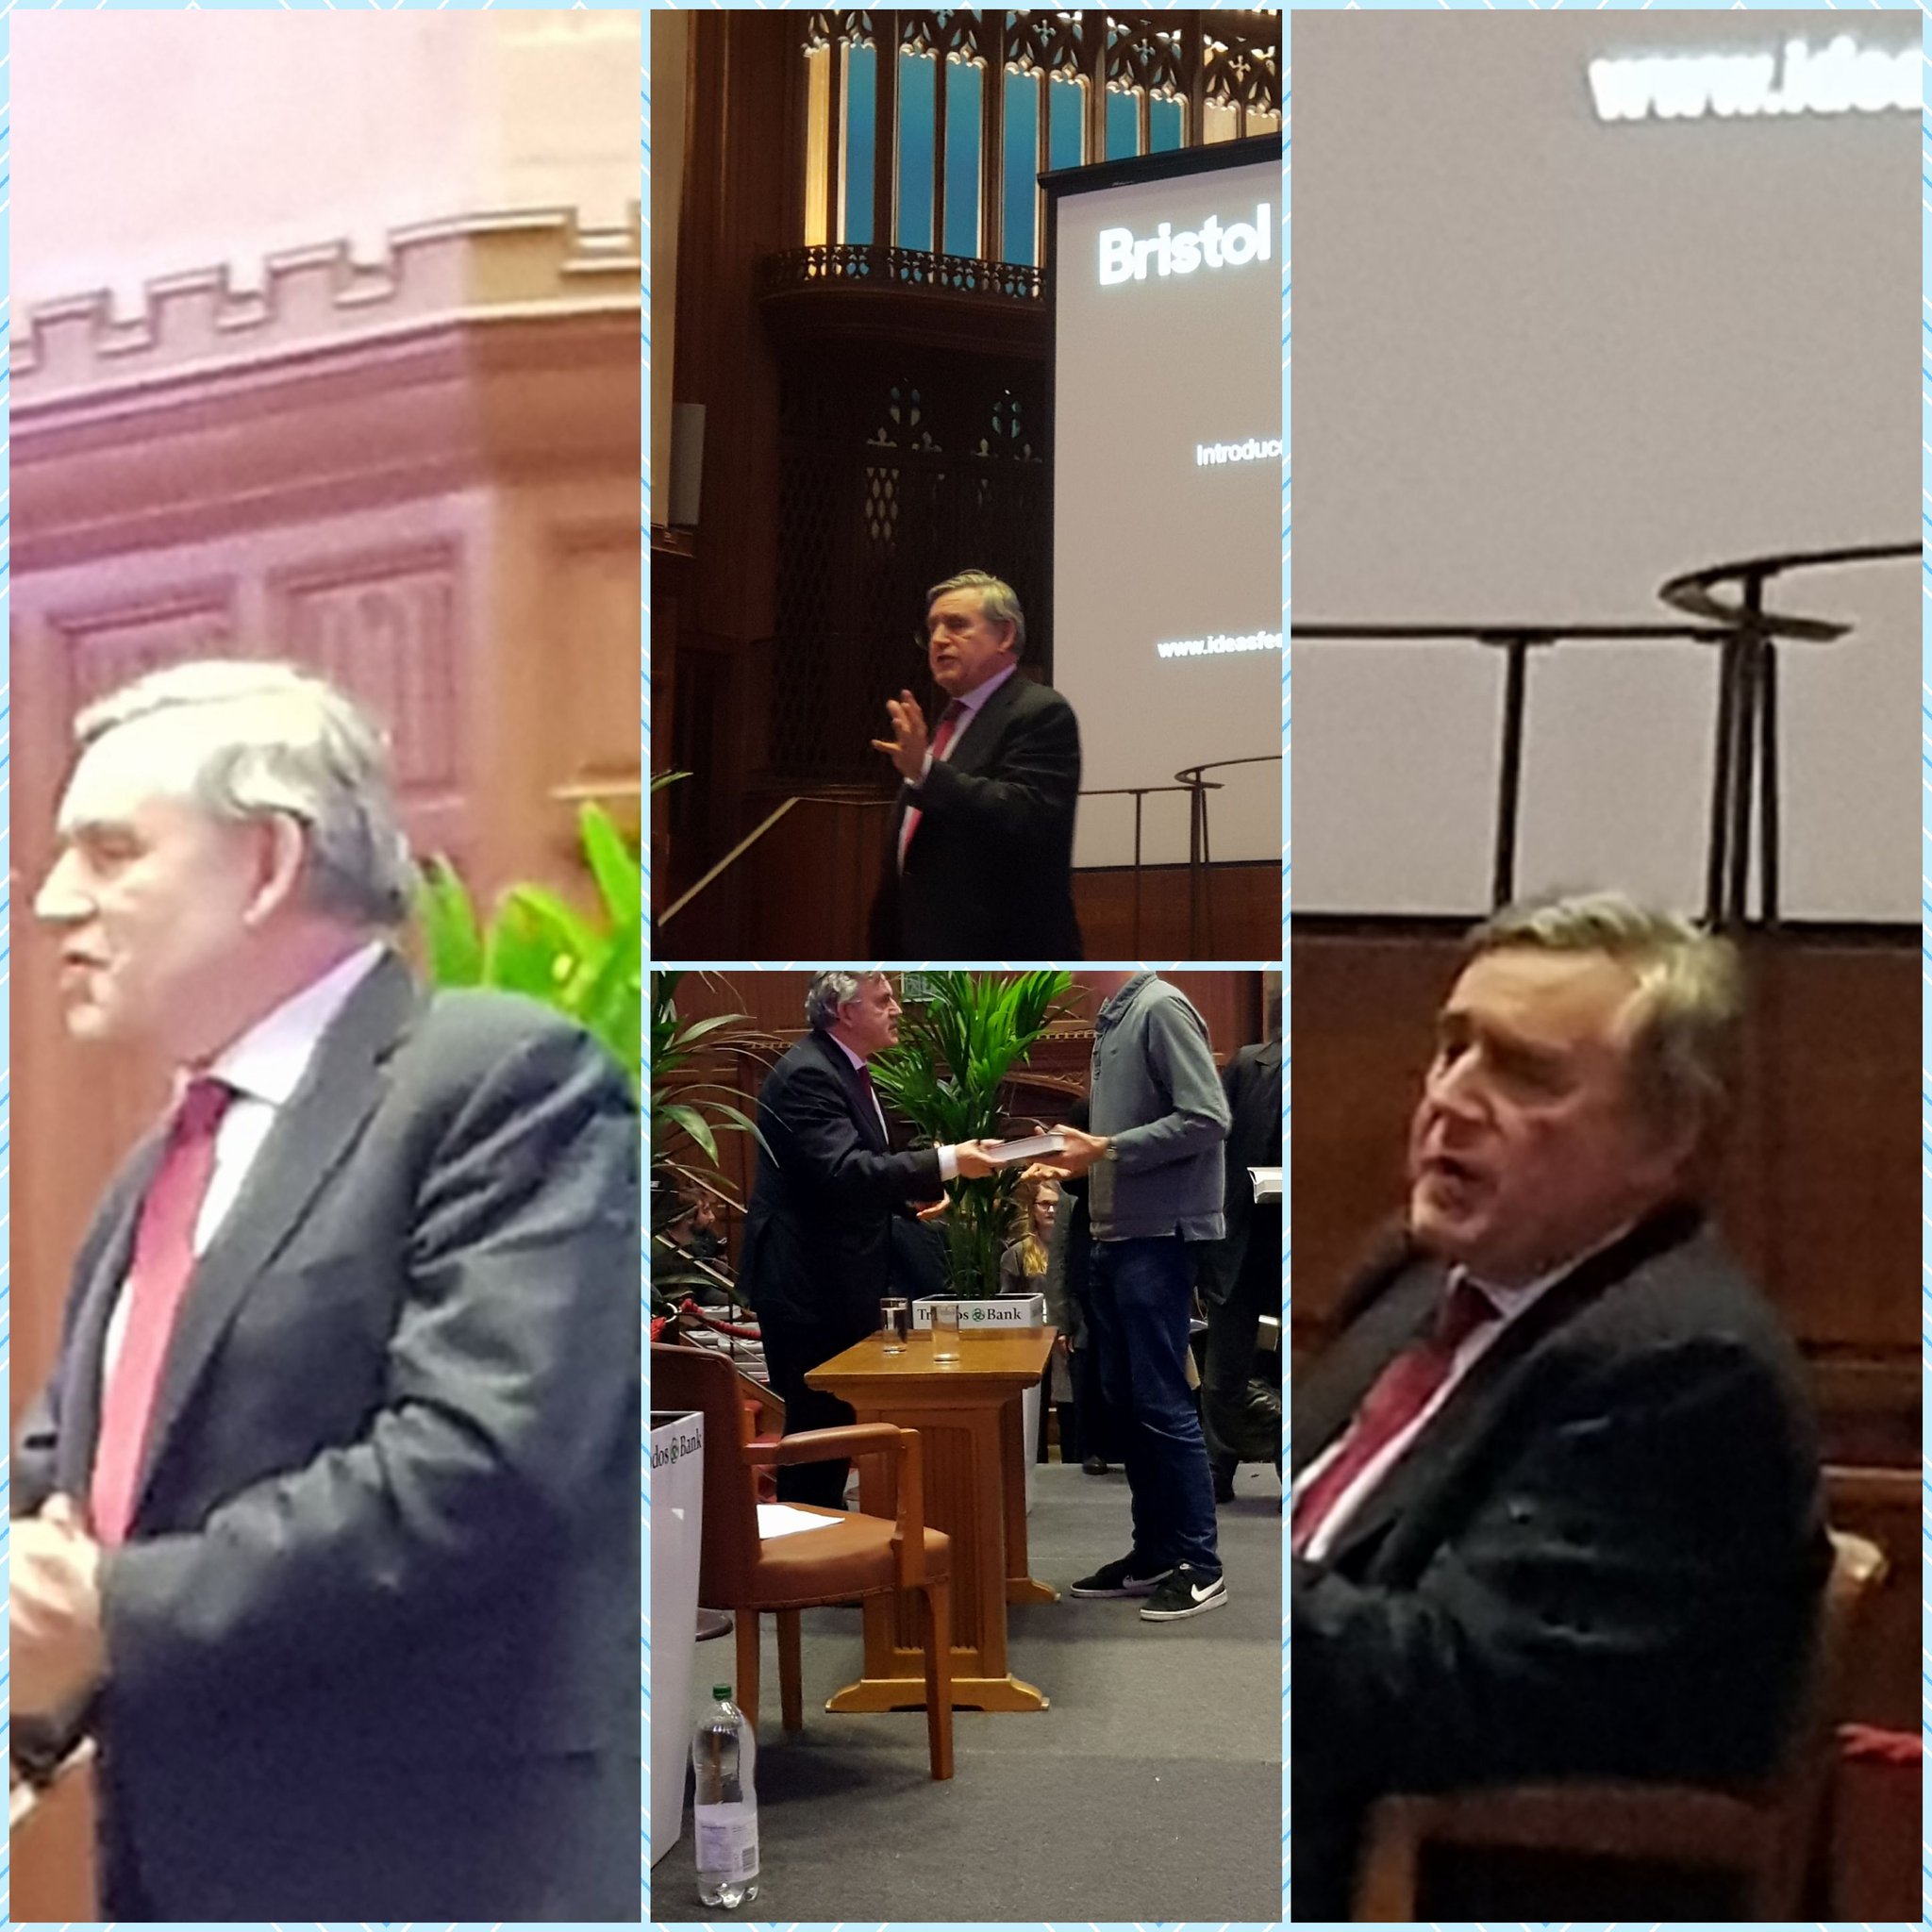 @FestivalofIdeas @GordonBrown Great talk tonight at the Wills building. An amusing and human Brown, freed from the constraints of office https://t.co/quL0WrMlW4